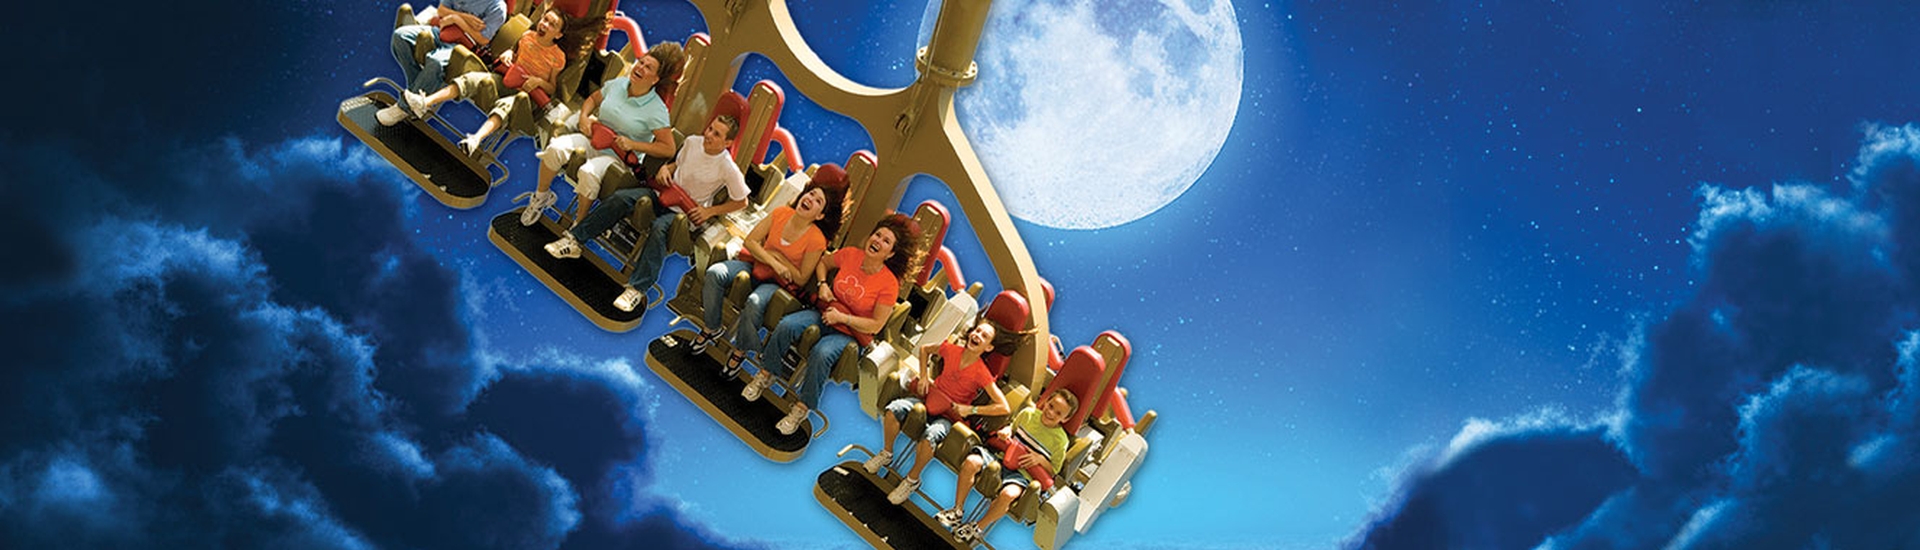 Silver Dollar City Open Late for Moonlight Madness! Branson Travel Office